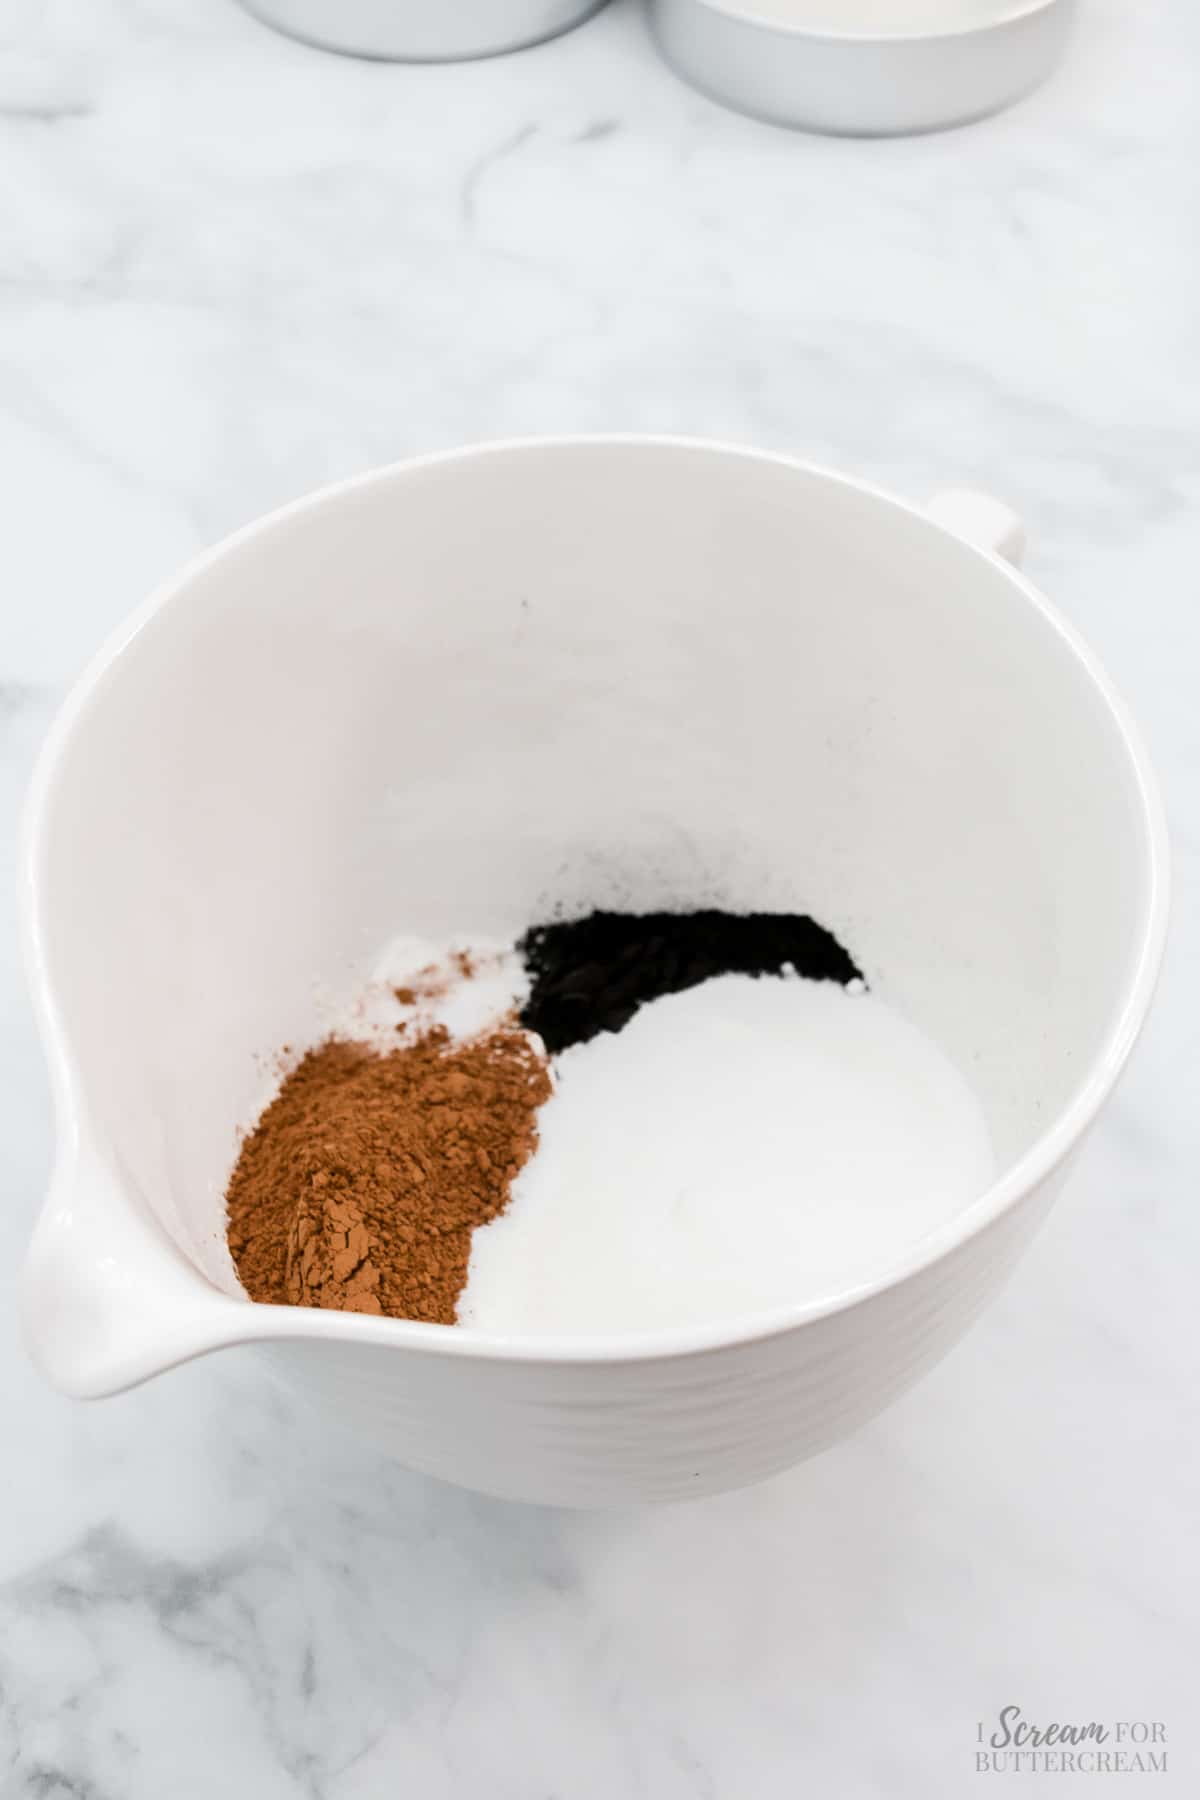 Dry cake batter ingredients in a white bowl.